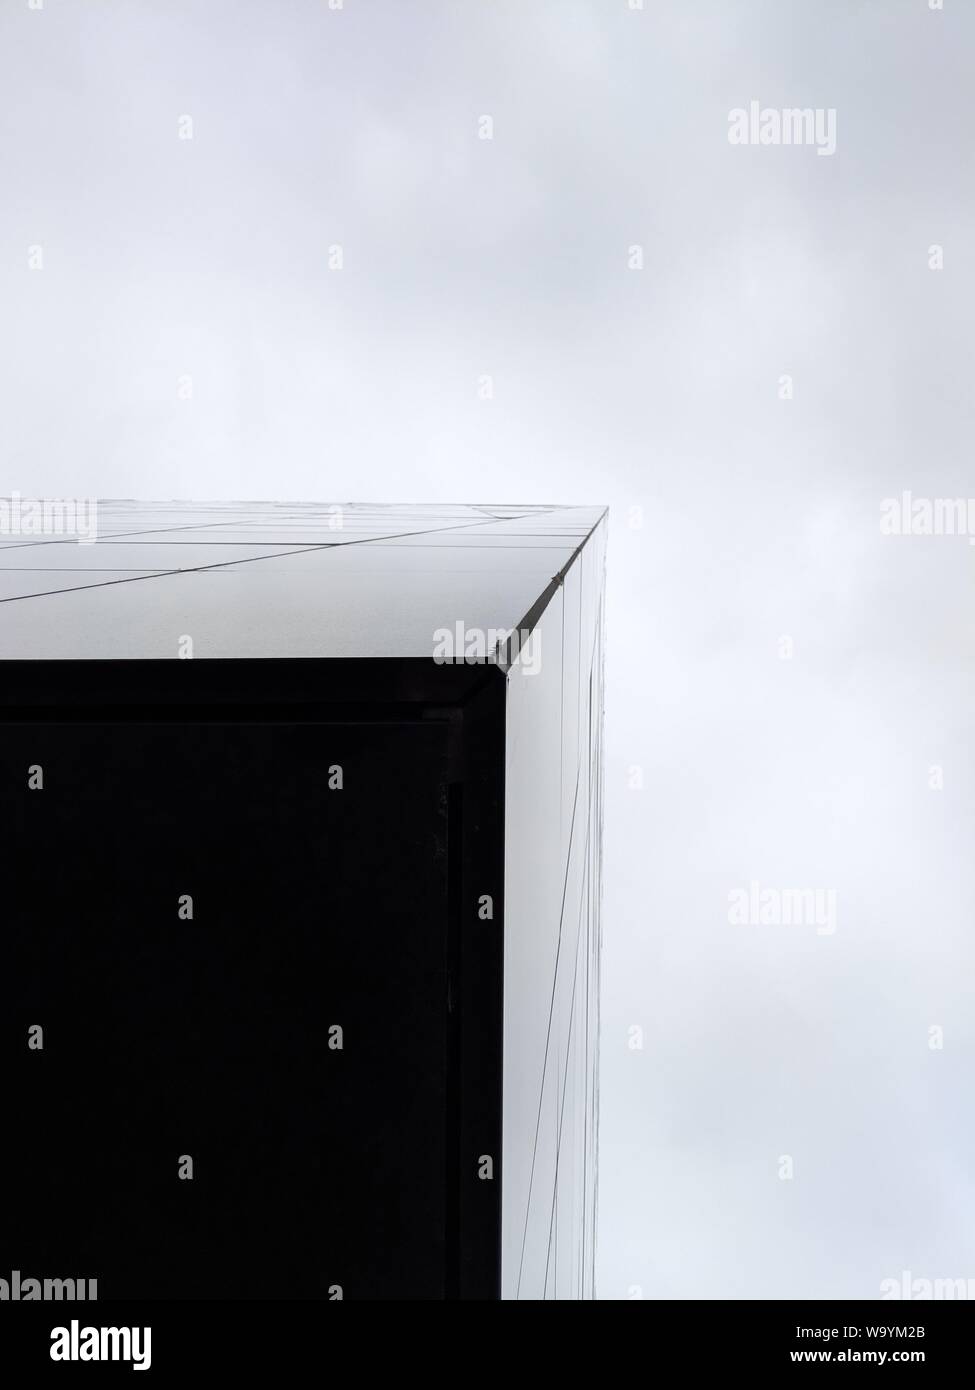 Vertical low angle shot of a high rise triangular building Stock Photo